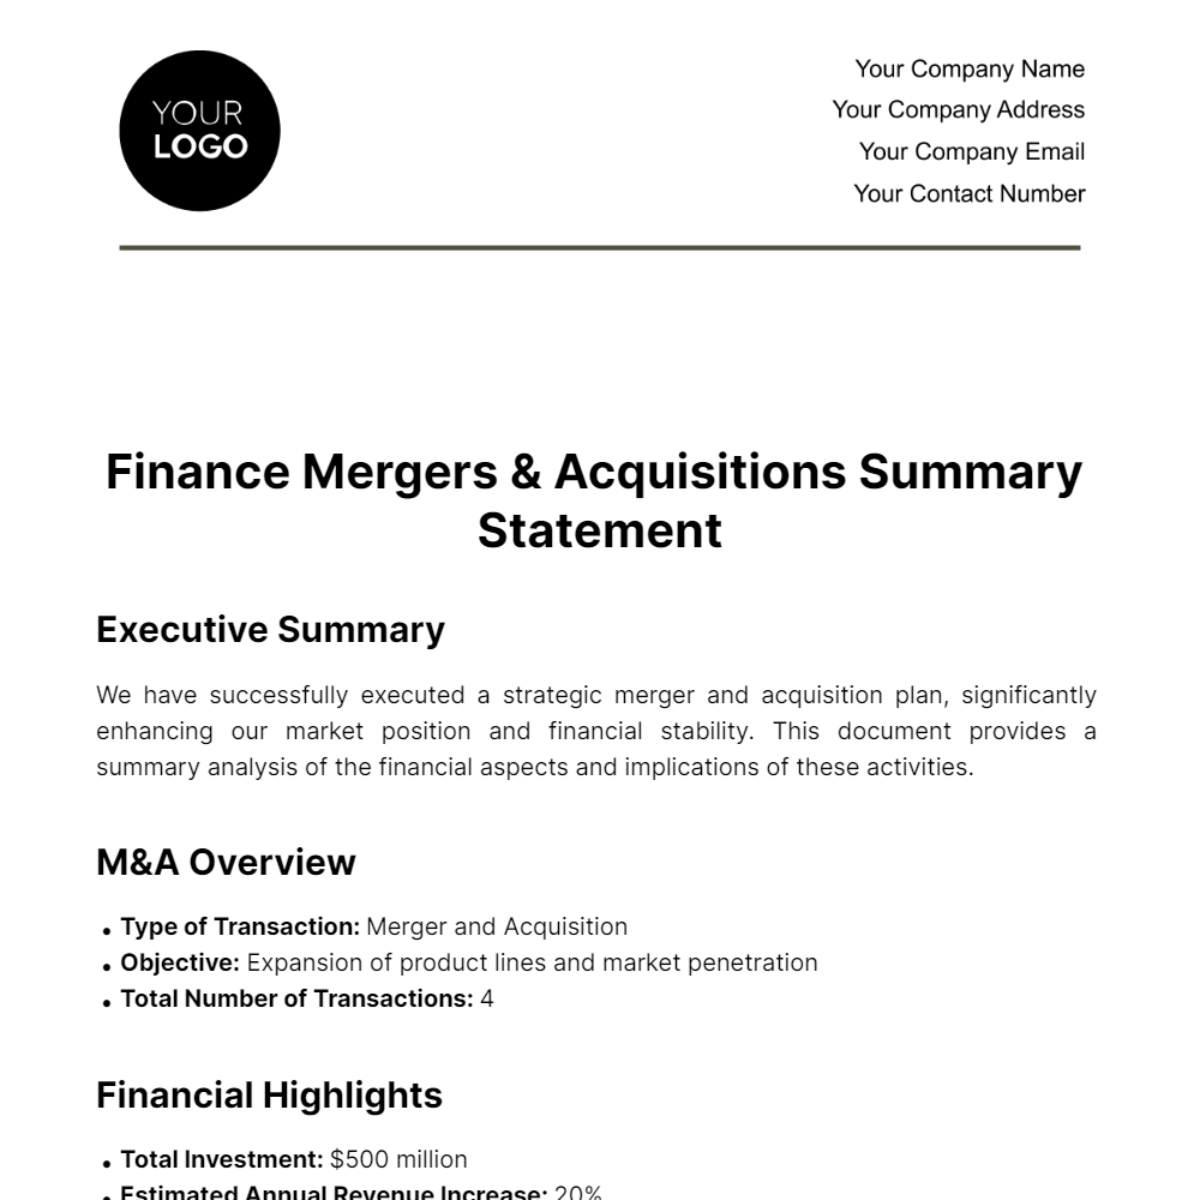 Finance Mergers & Acquisitions Summary Statement Template